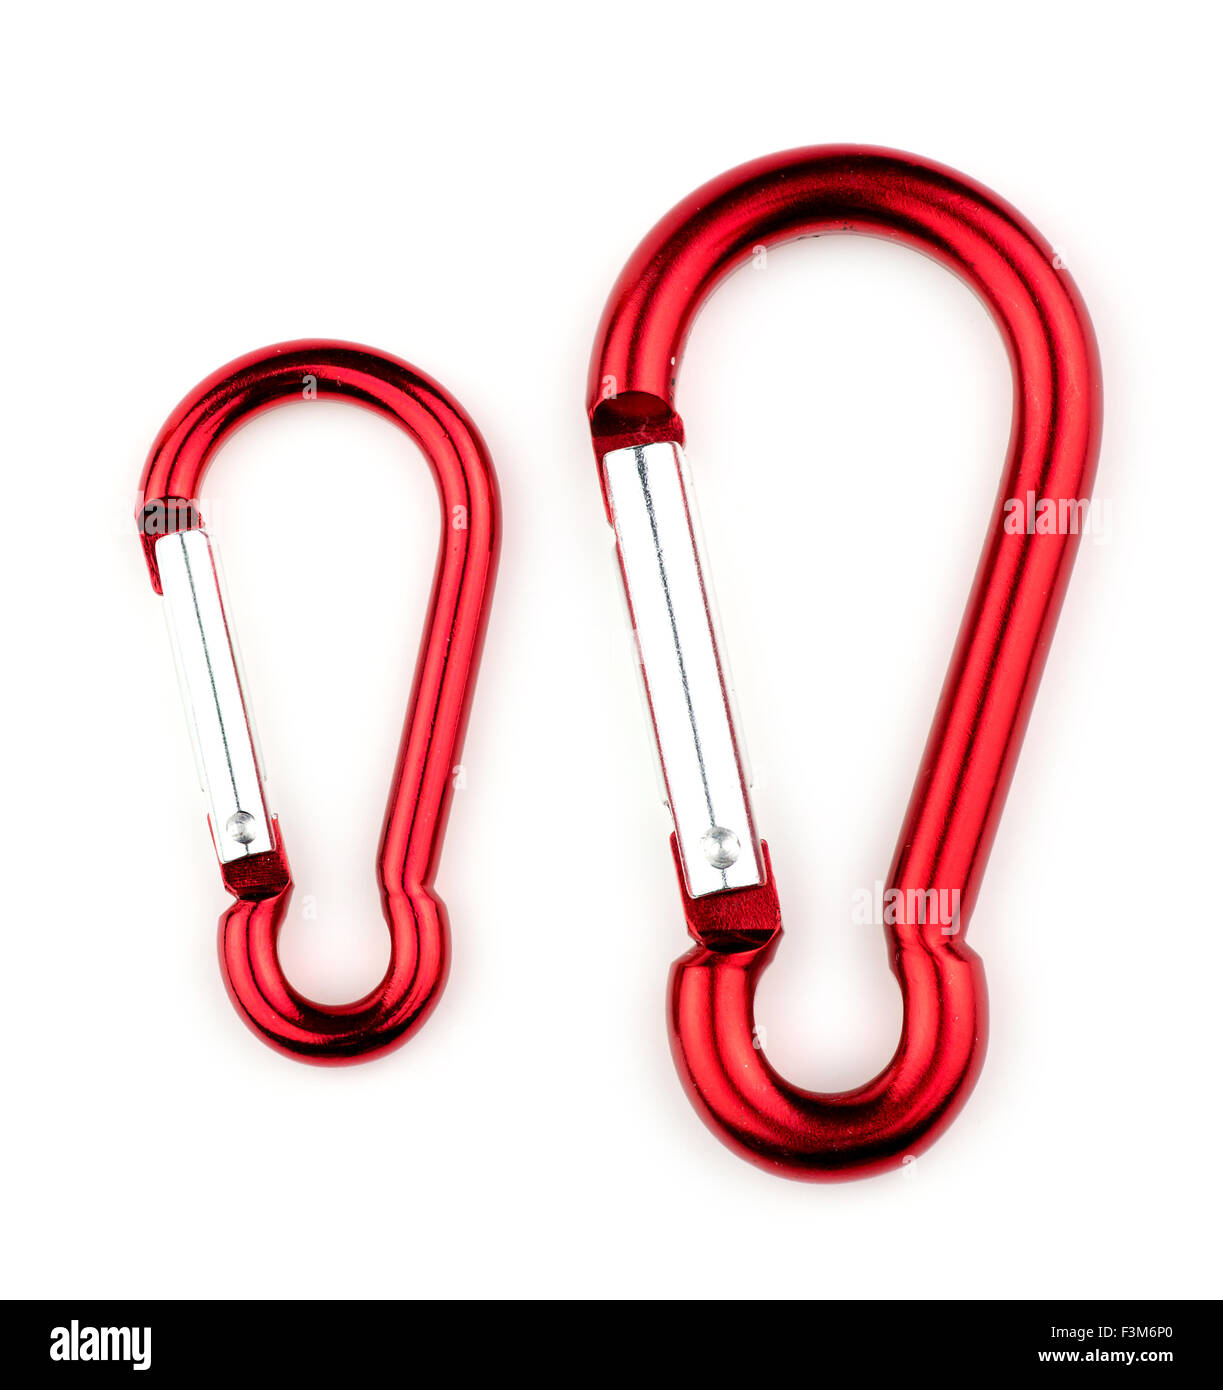 Small and large carabiner outdoor extreme sports hooks Stock Photo